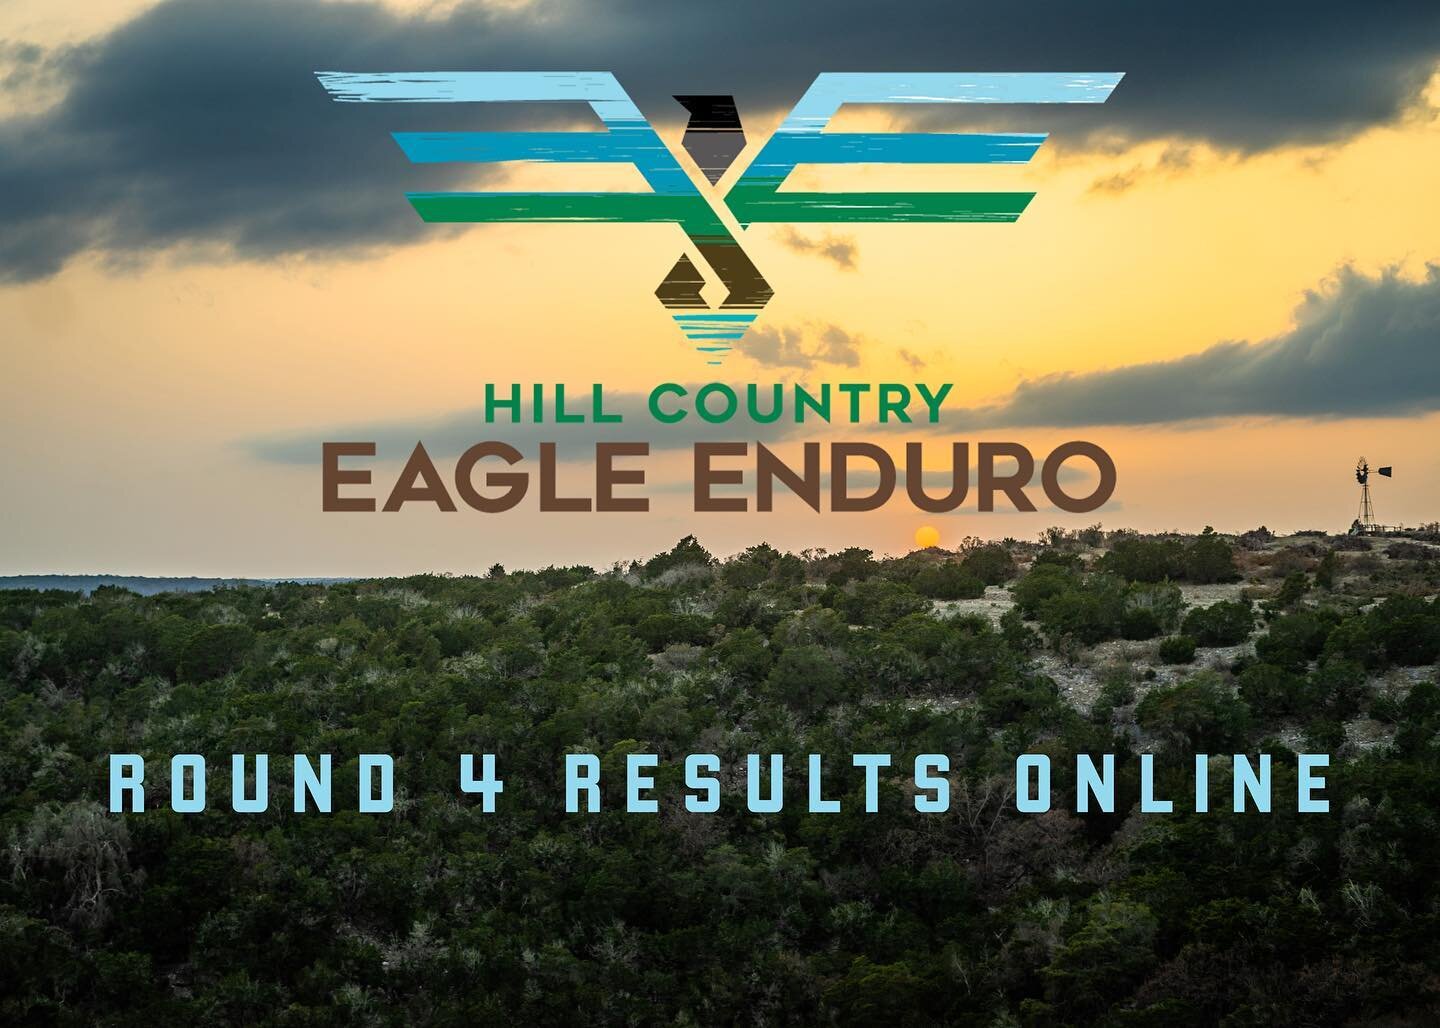 Results from Round 4, the Hill Country Eagle Enduro, are posted online (Link In Bio)! Huge thanks to everyone for an amazing weekend of shredding the gnar with us at Camp Eagle 🦅 hope to see y&rsquo;all back in Arkansas for Redemption!!
-
There&rsqu